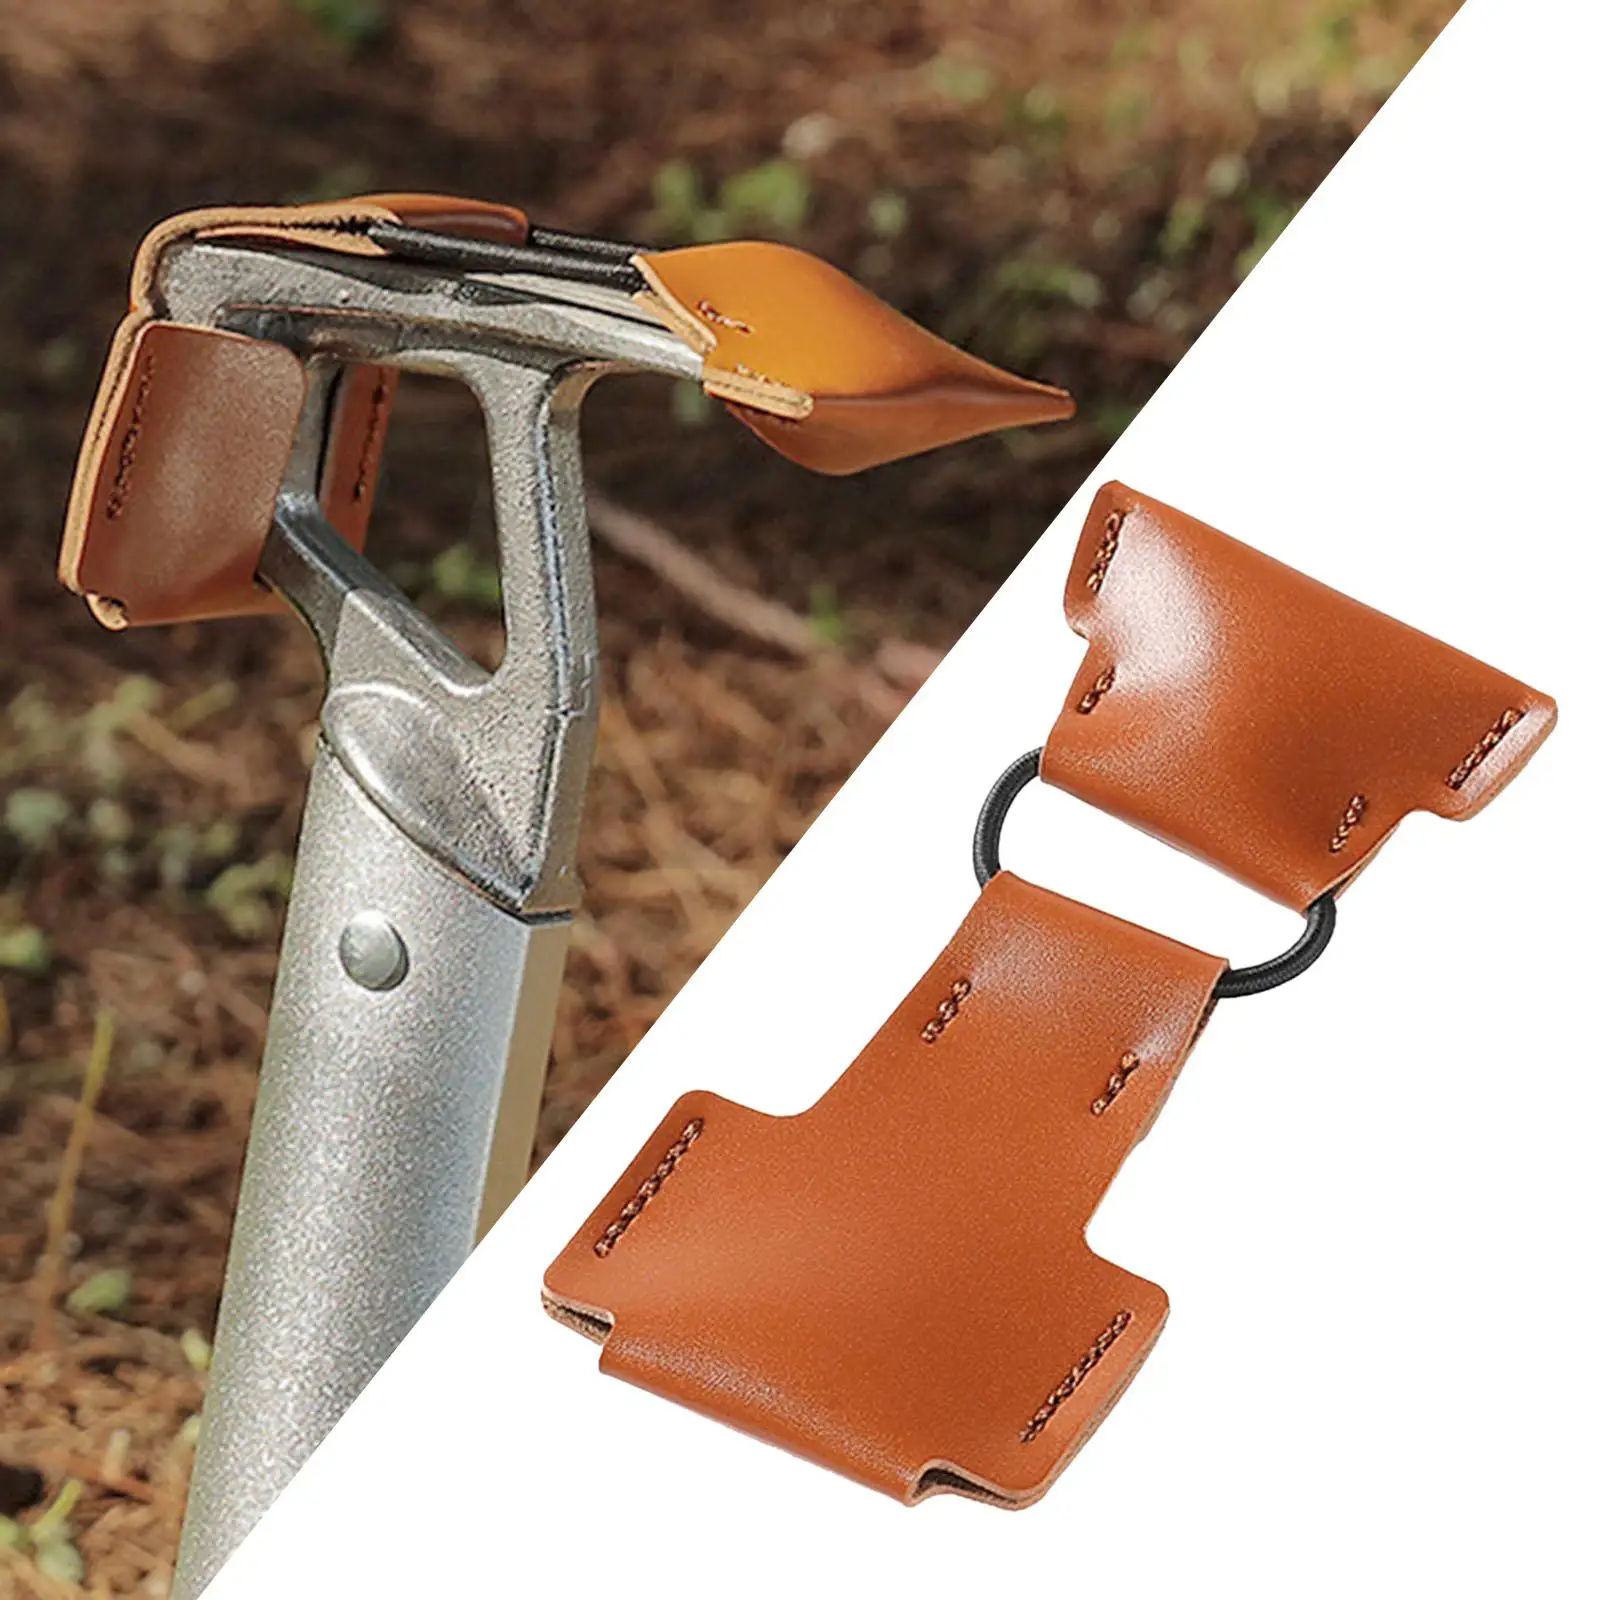 Outdoor Camping Tent Pegs Hammer Leather Protect Cover With Elastic Rope Light Wear-resistant Double-headed Tent Accessories